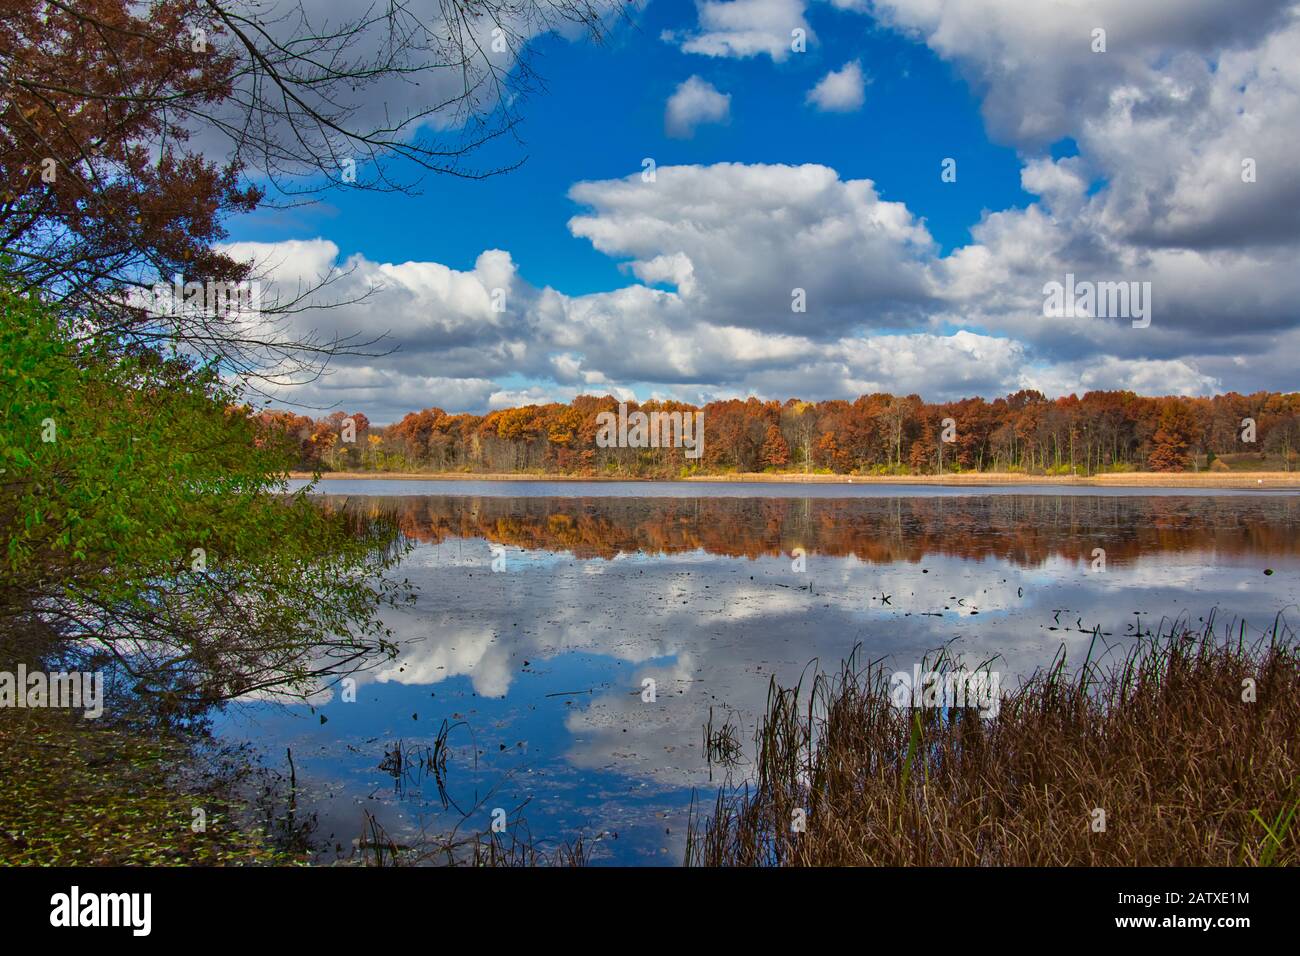 Kensington Metropark's Wildwing Lake on a beautiful, sunny, fall morning, with a cloud-filled sky reflected in its waters. Stock Photo